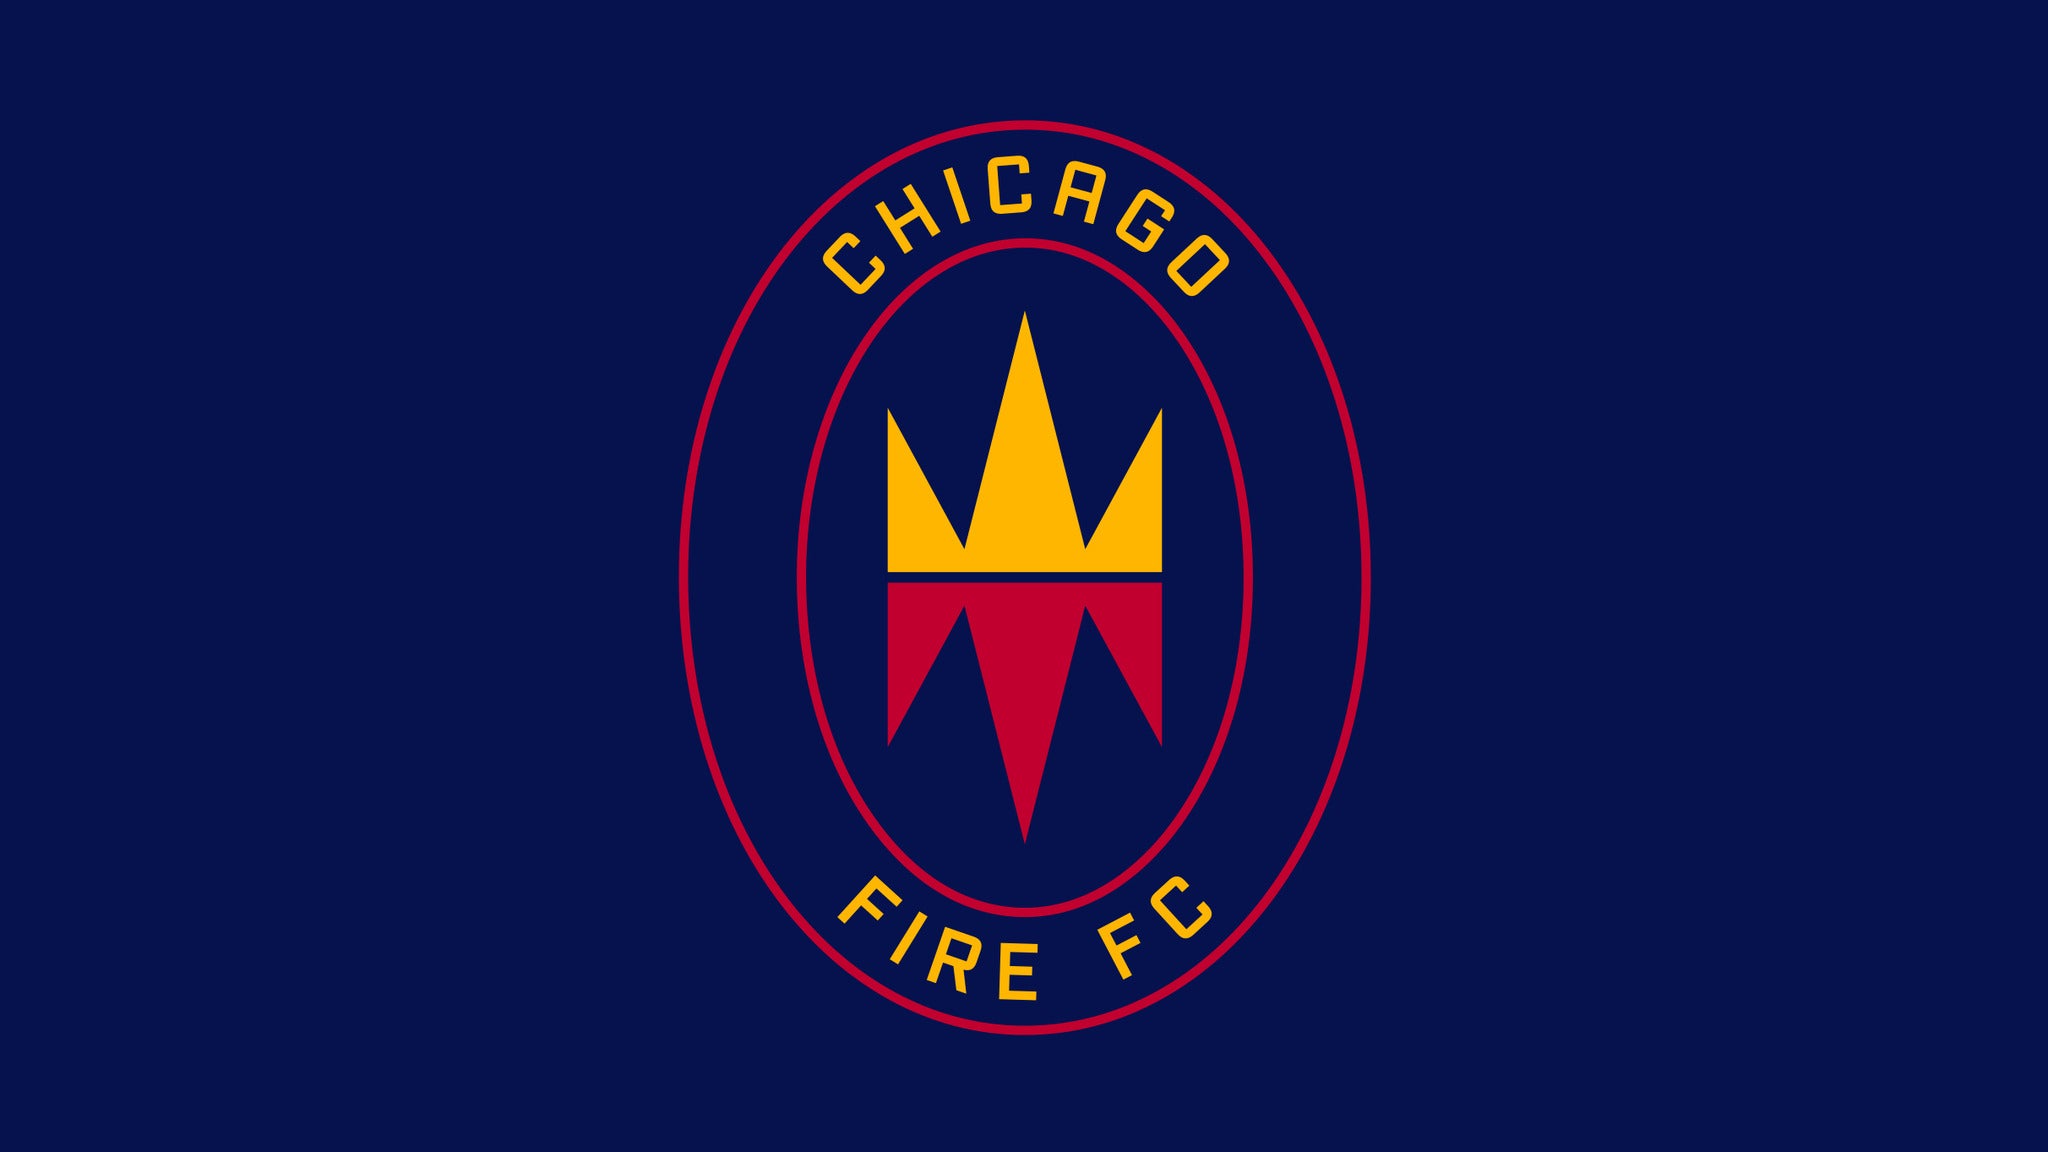 Image used with permission from Ticketmaster | Chicago Fire FC vs. Inter Miami CF tickets